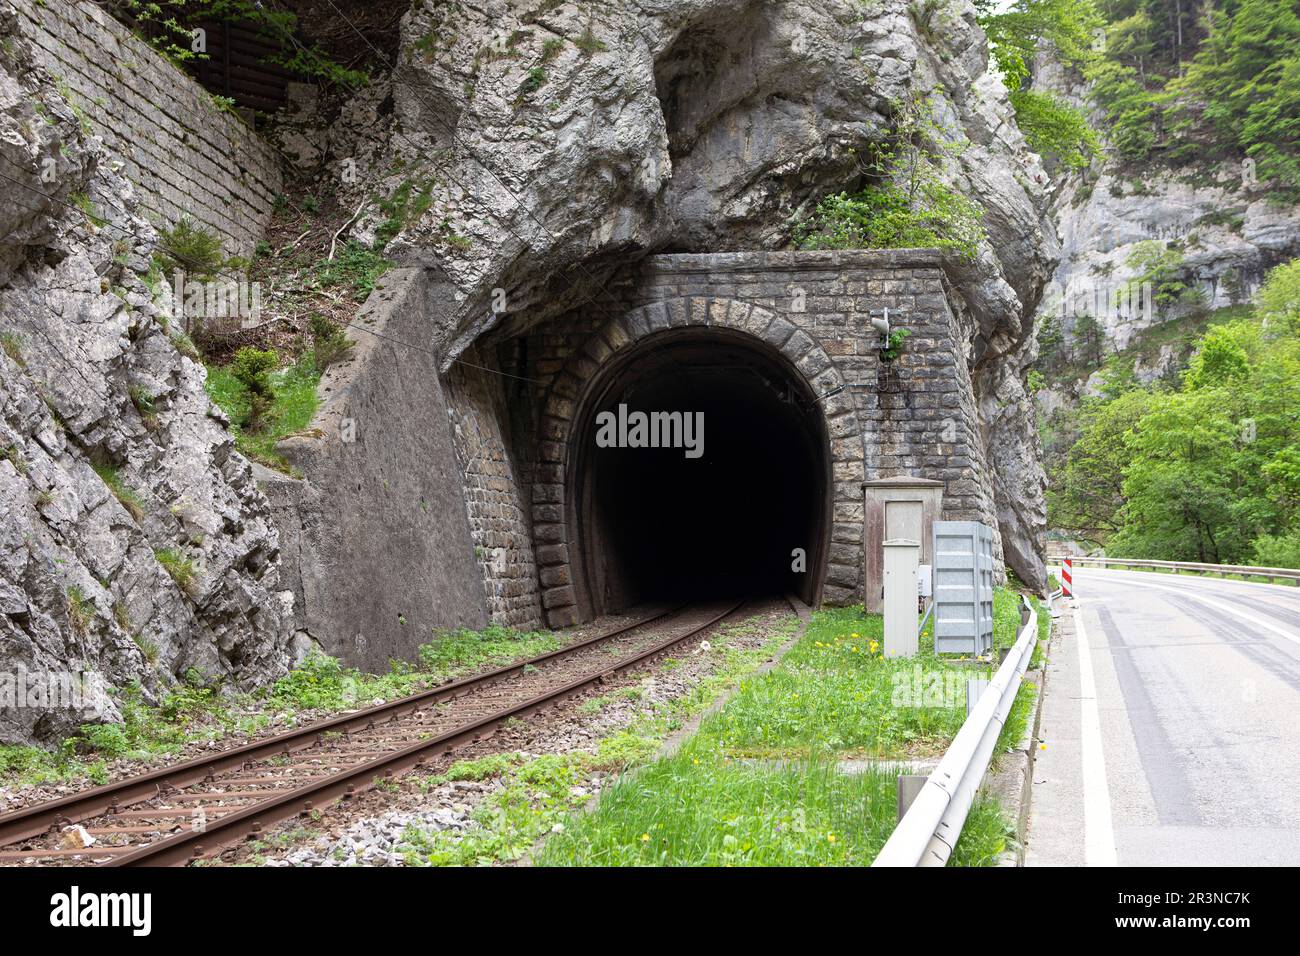 Old train tunnel with railway in a mountain. Dark hollow at tunnel entrance. Swiss railway infrastructure built in the mountains, tunnel enter. Stock Photo